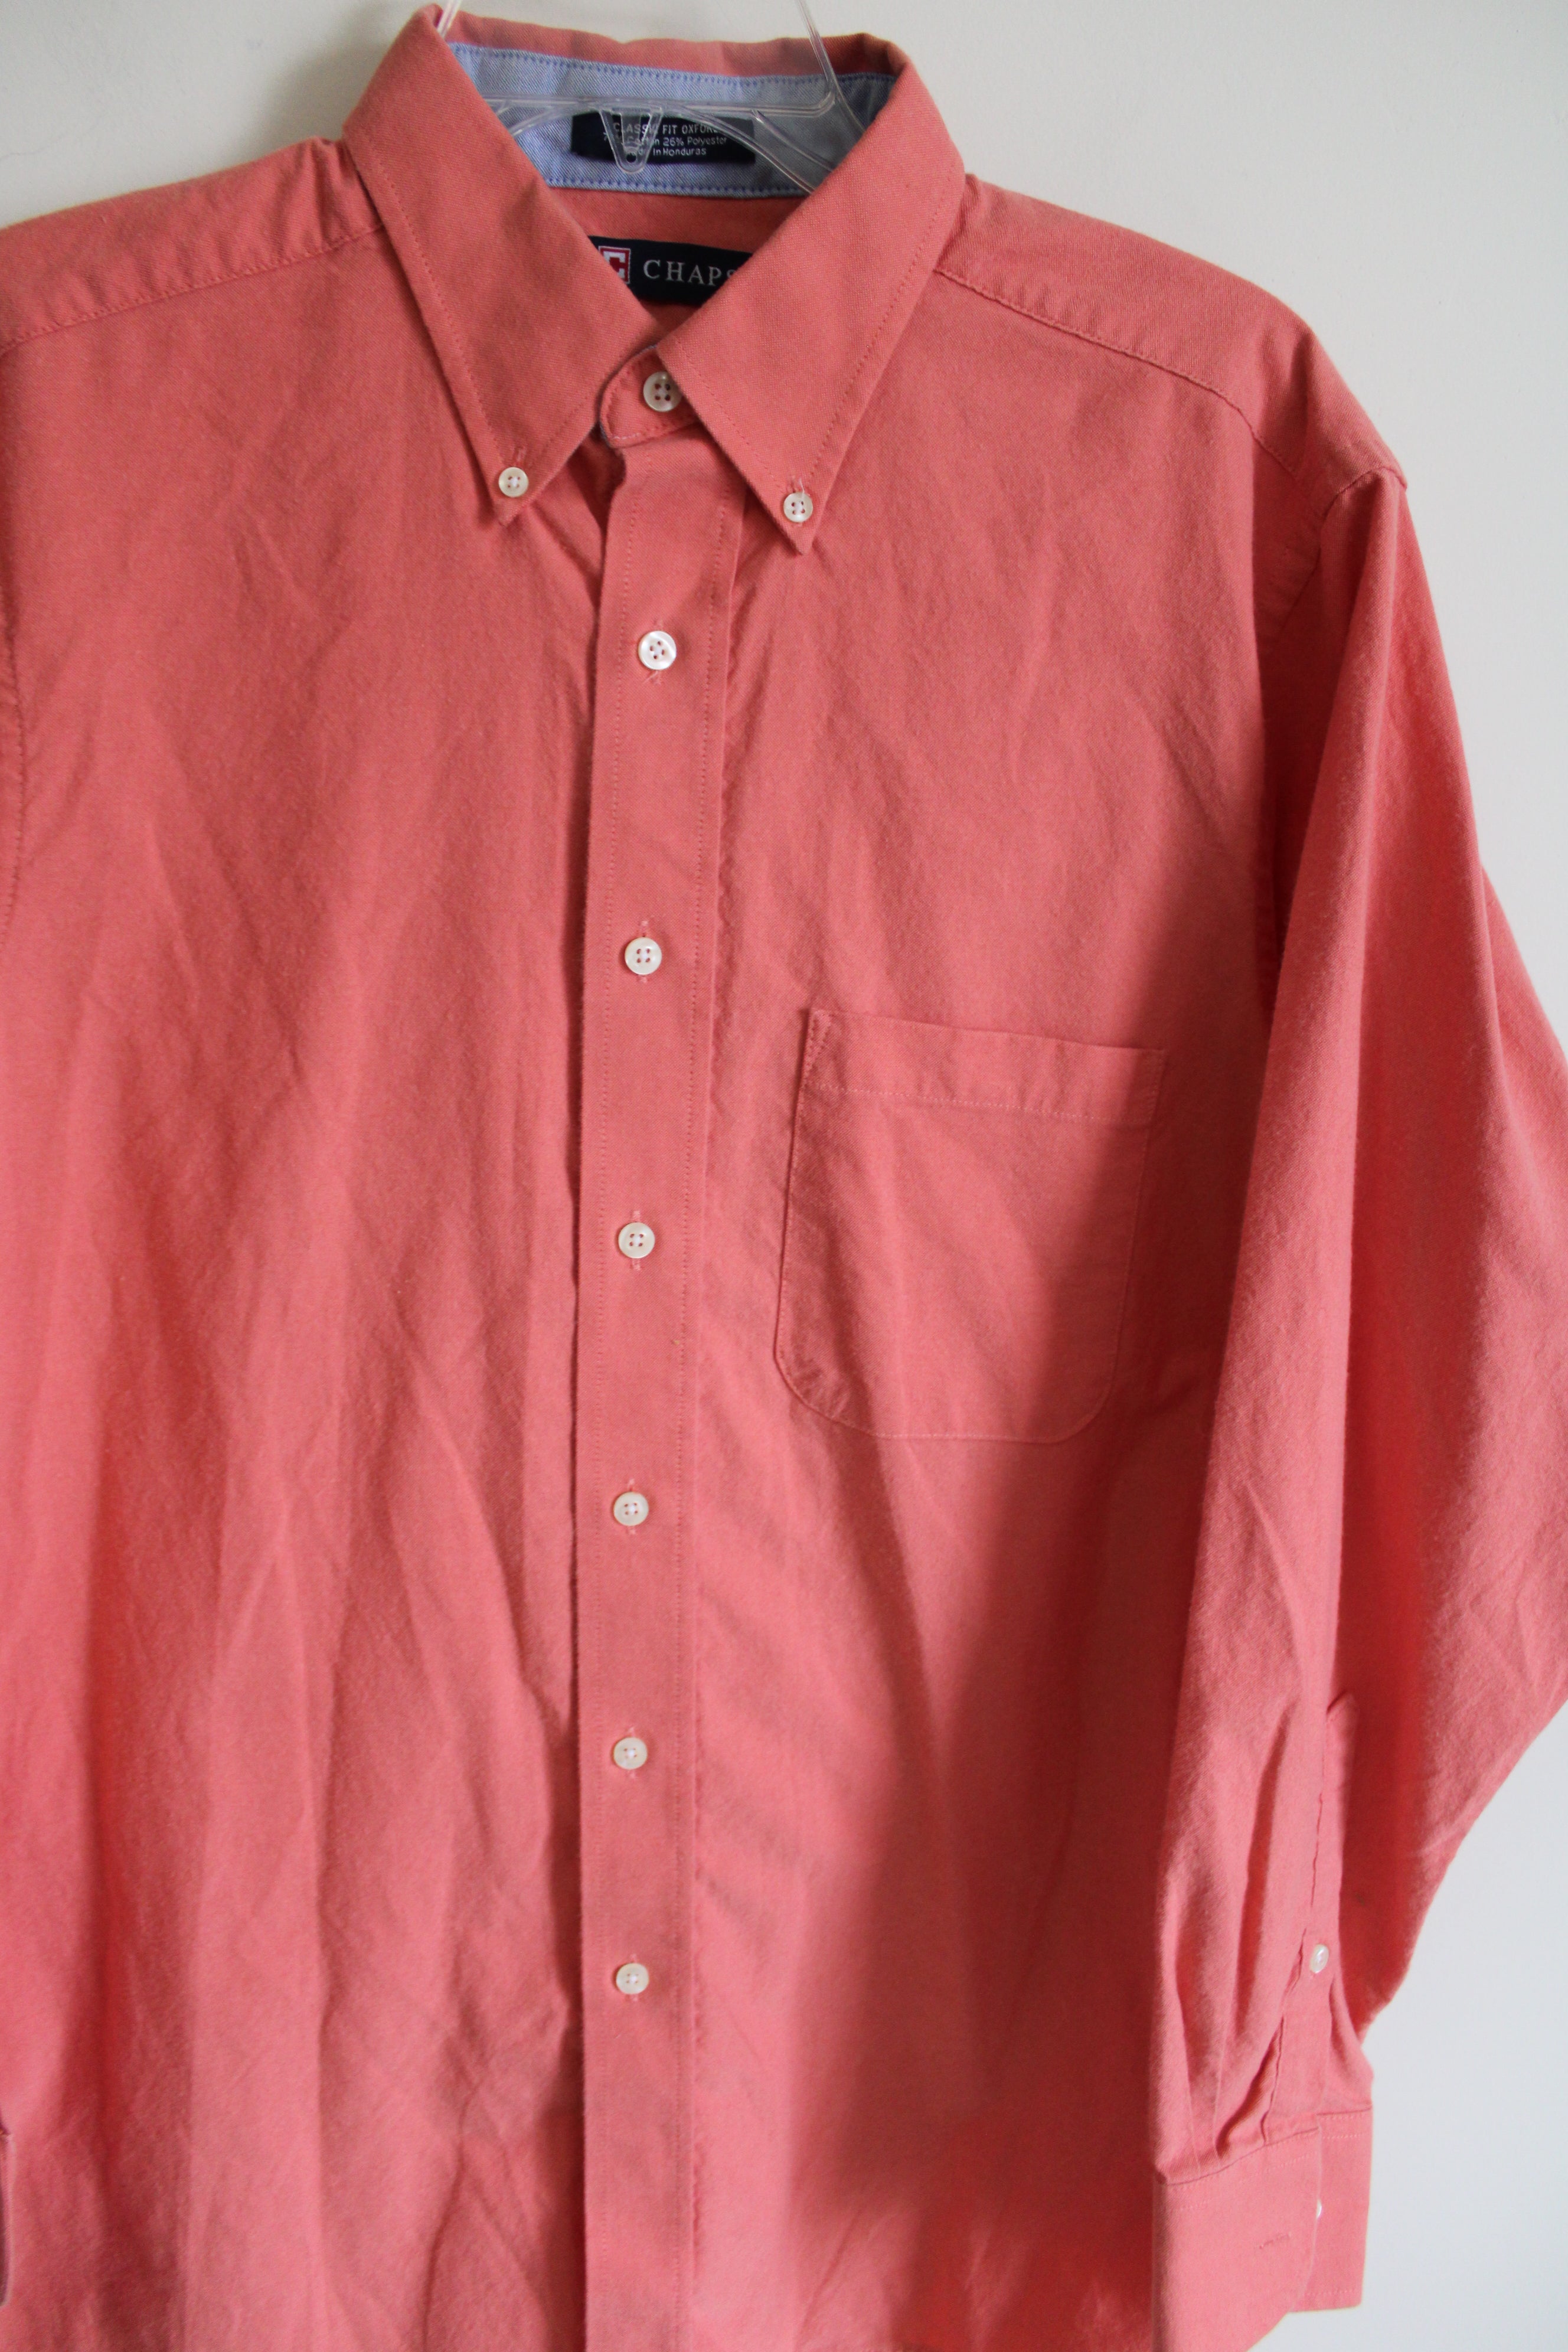 Chaps Coral Classic Fit Oxford Shirt | 15-15 1/2 32/33